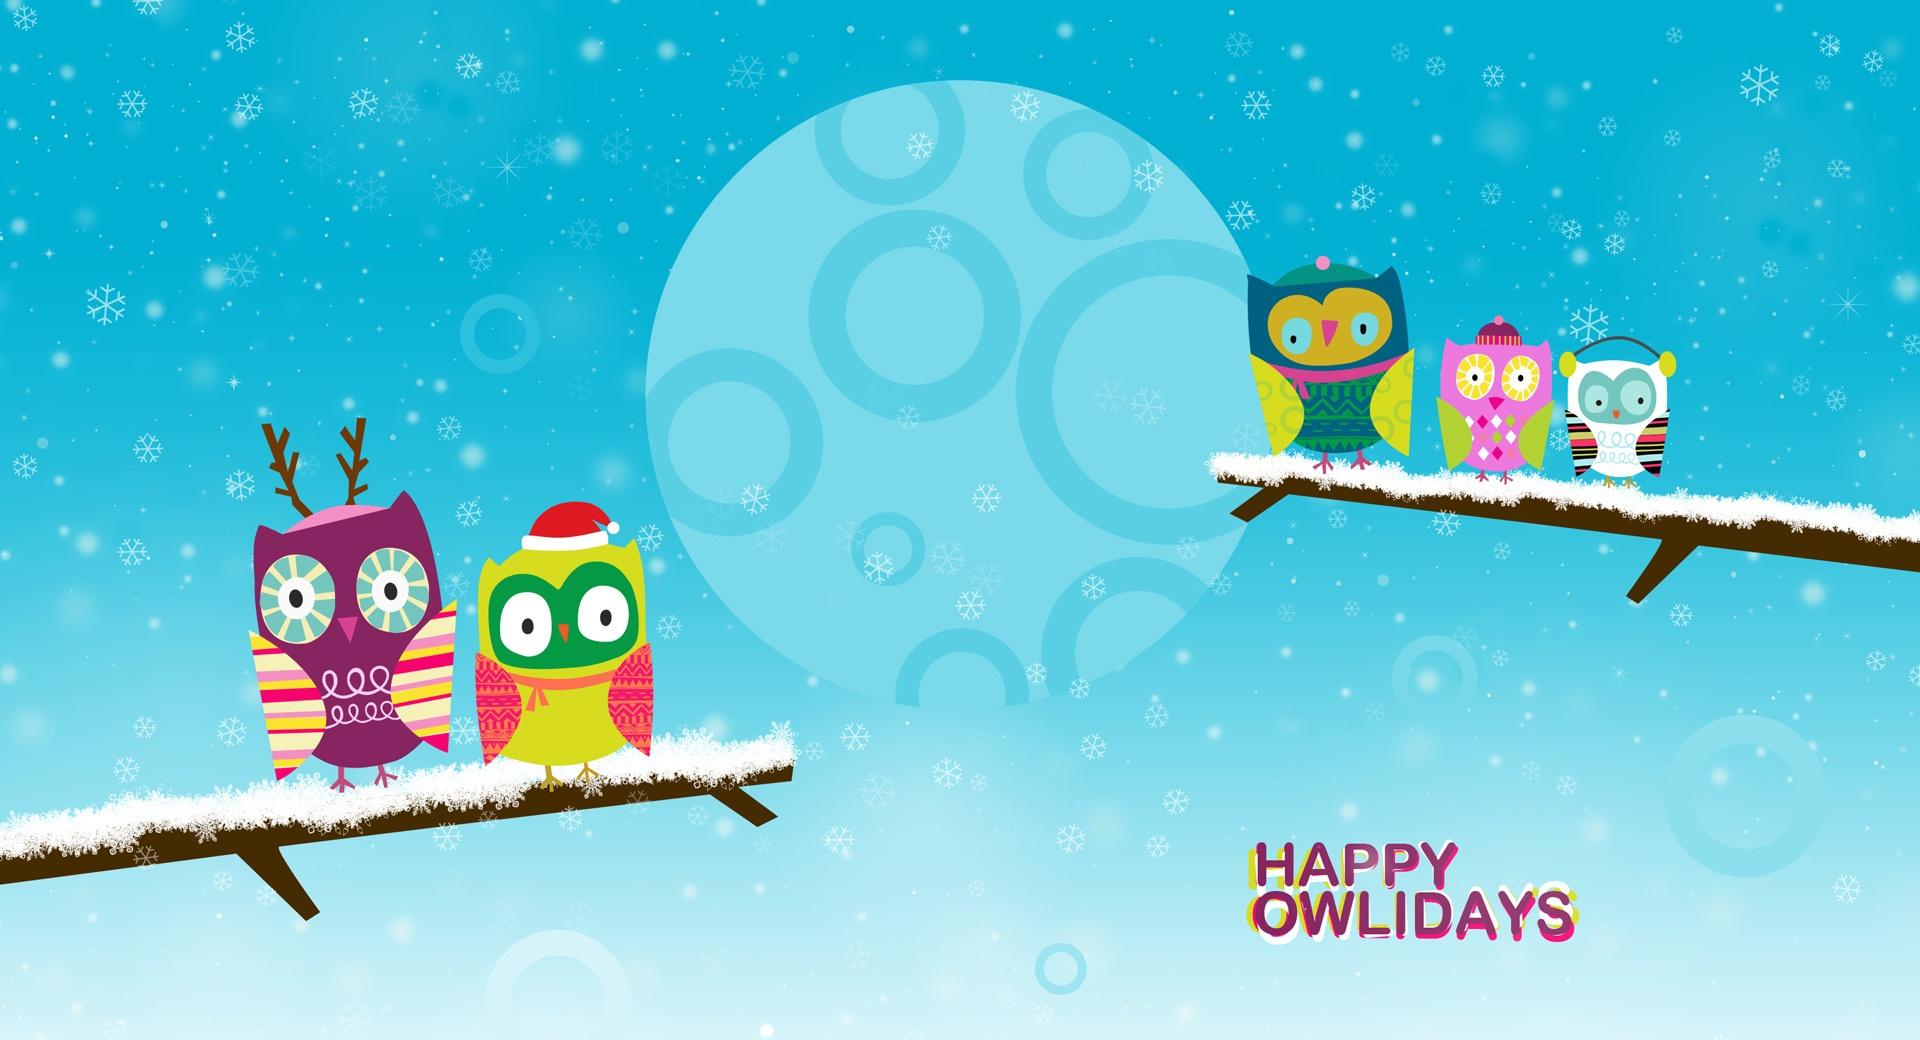 Happy Owlidays by PimpYourScreen wallpapers HD quality